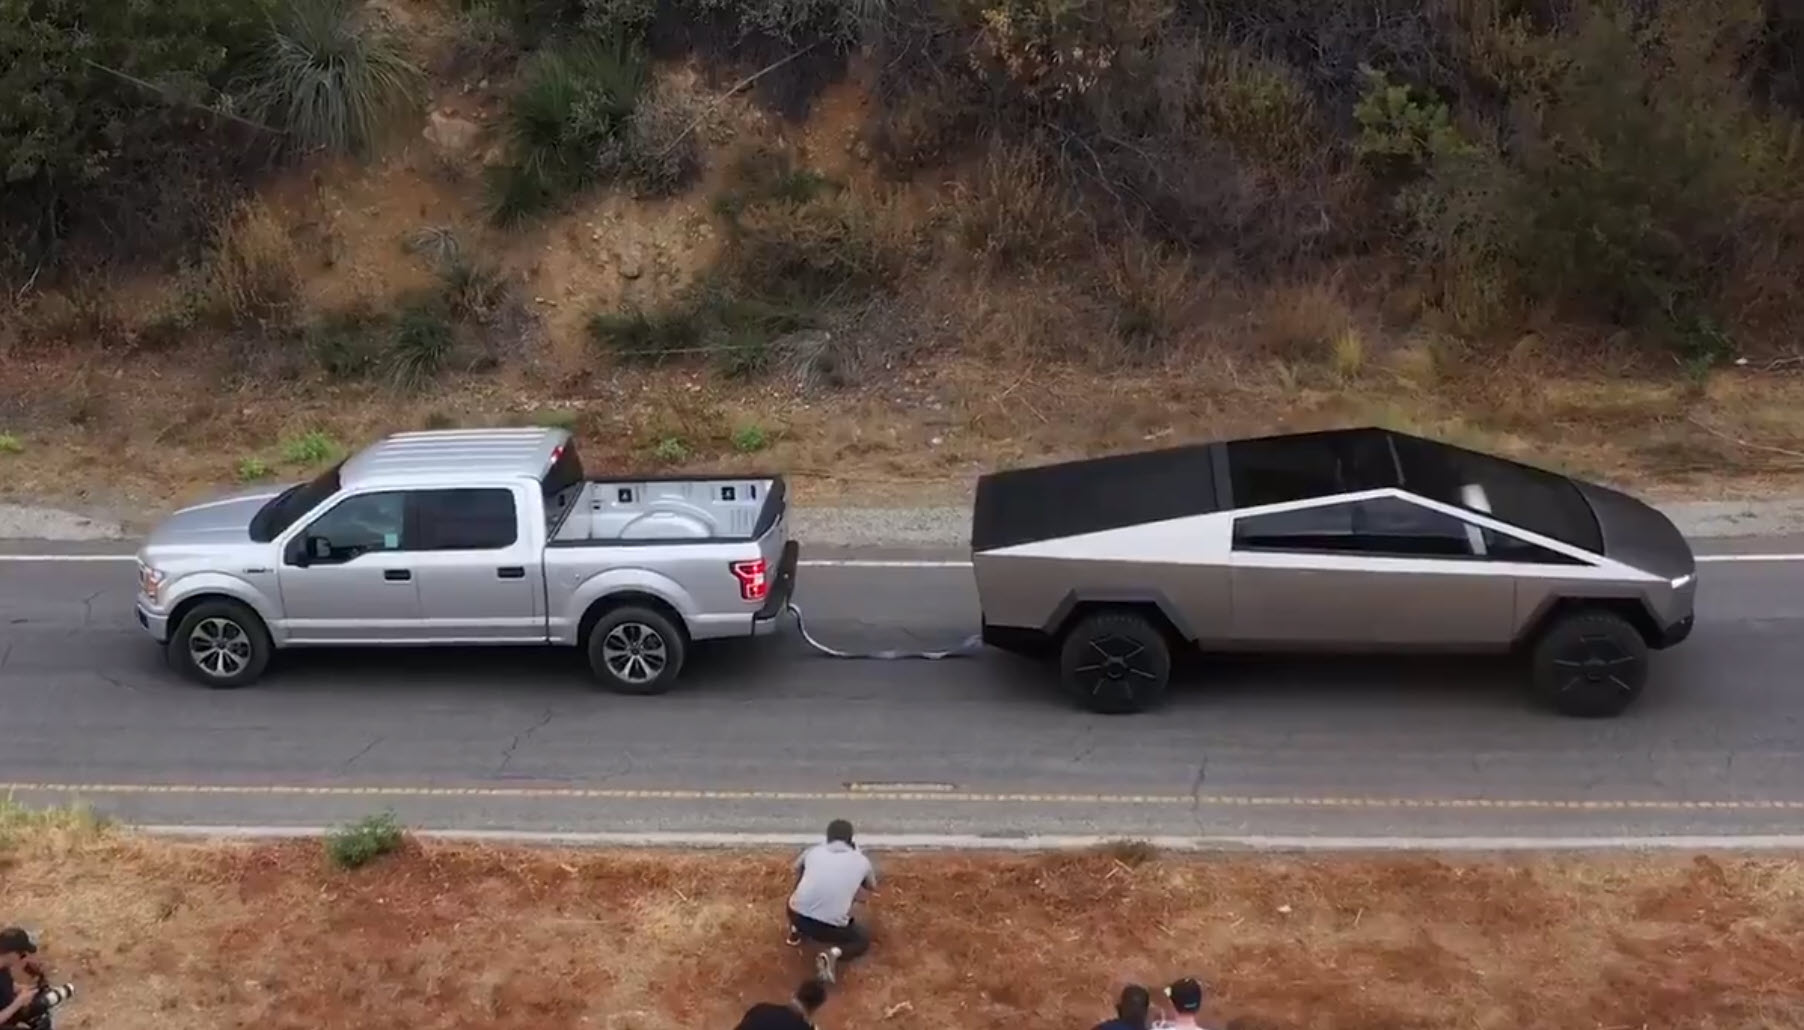 Tesla Cybertruck Tows Ford F-150 Up a Hill in Tug of War Video